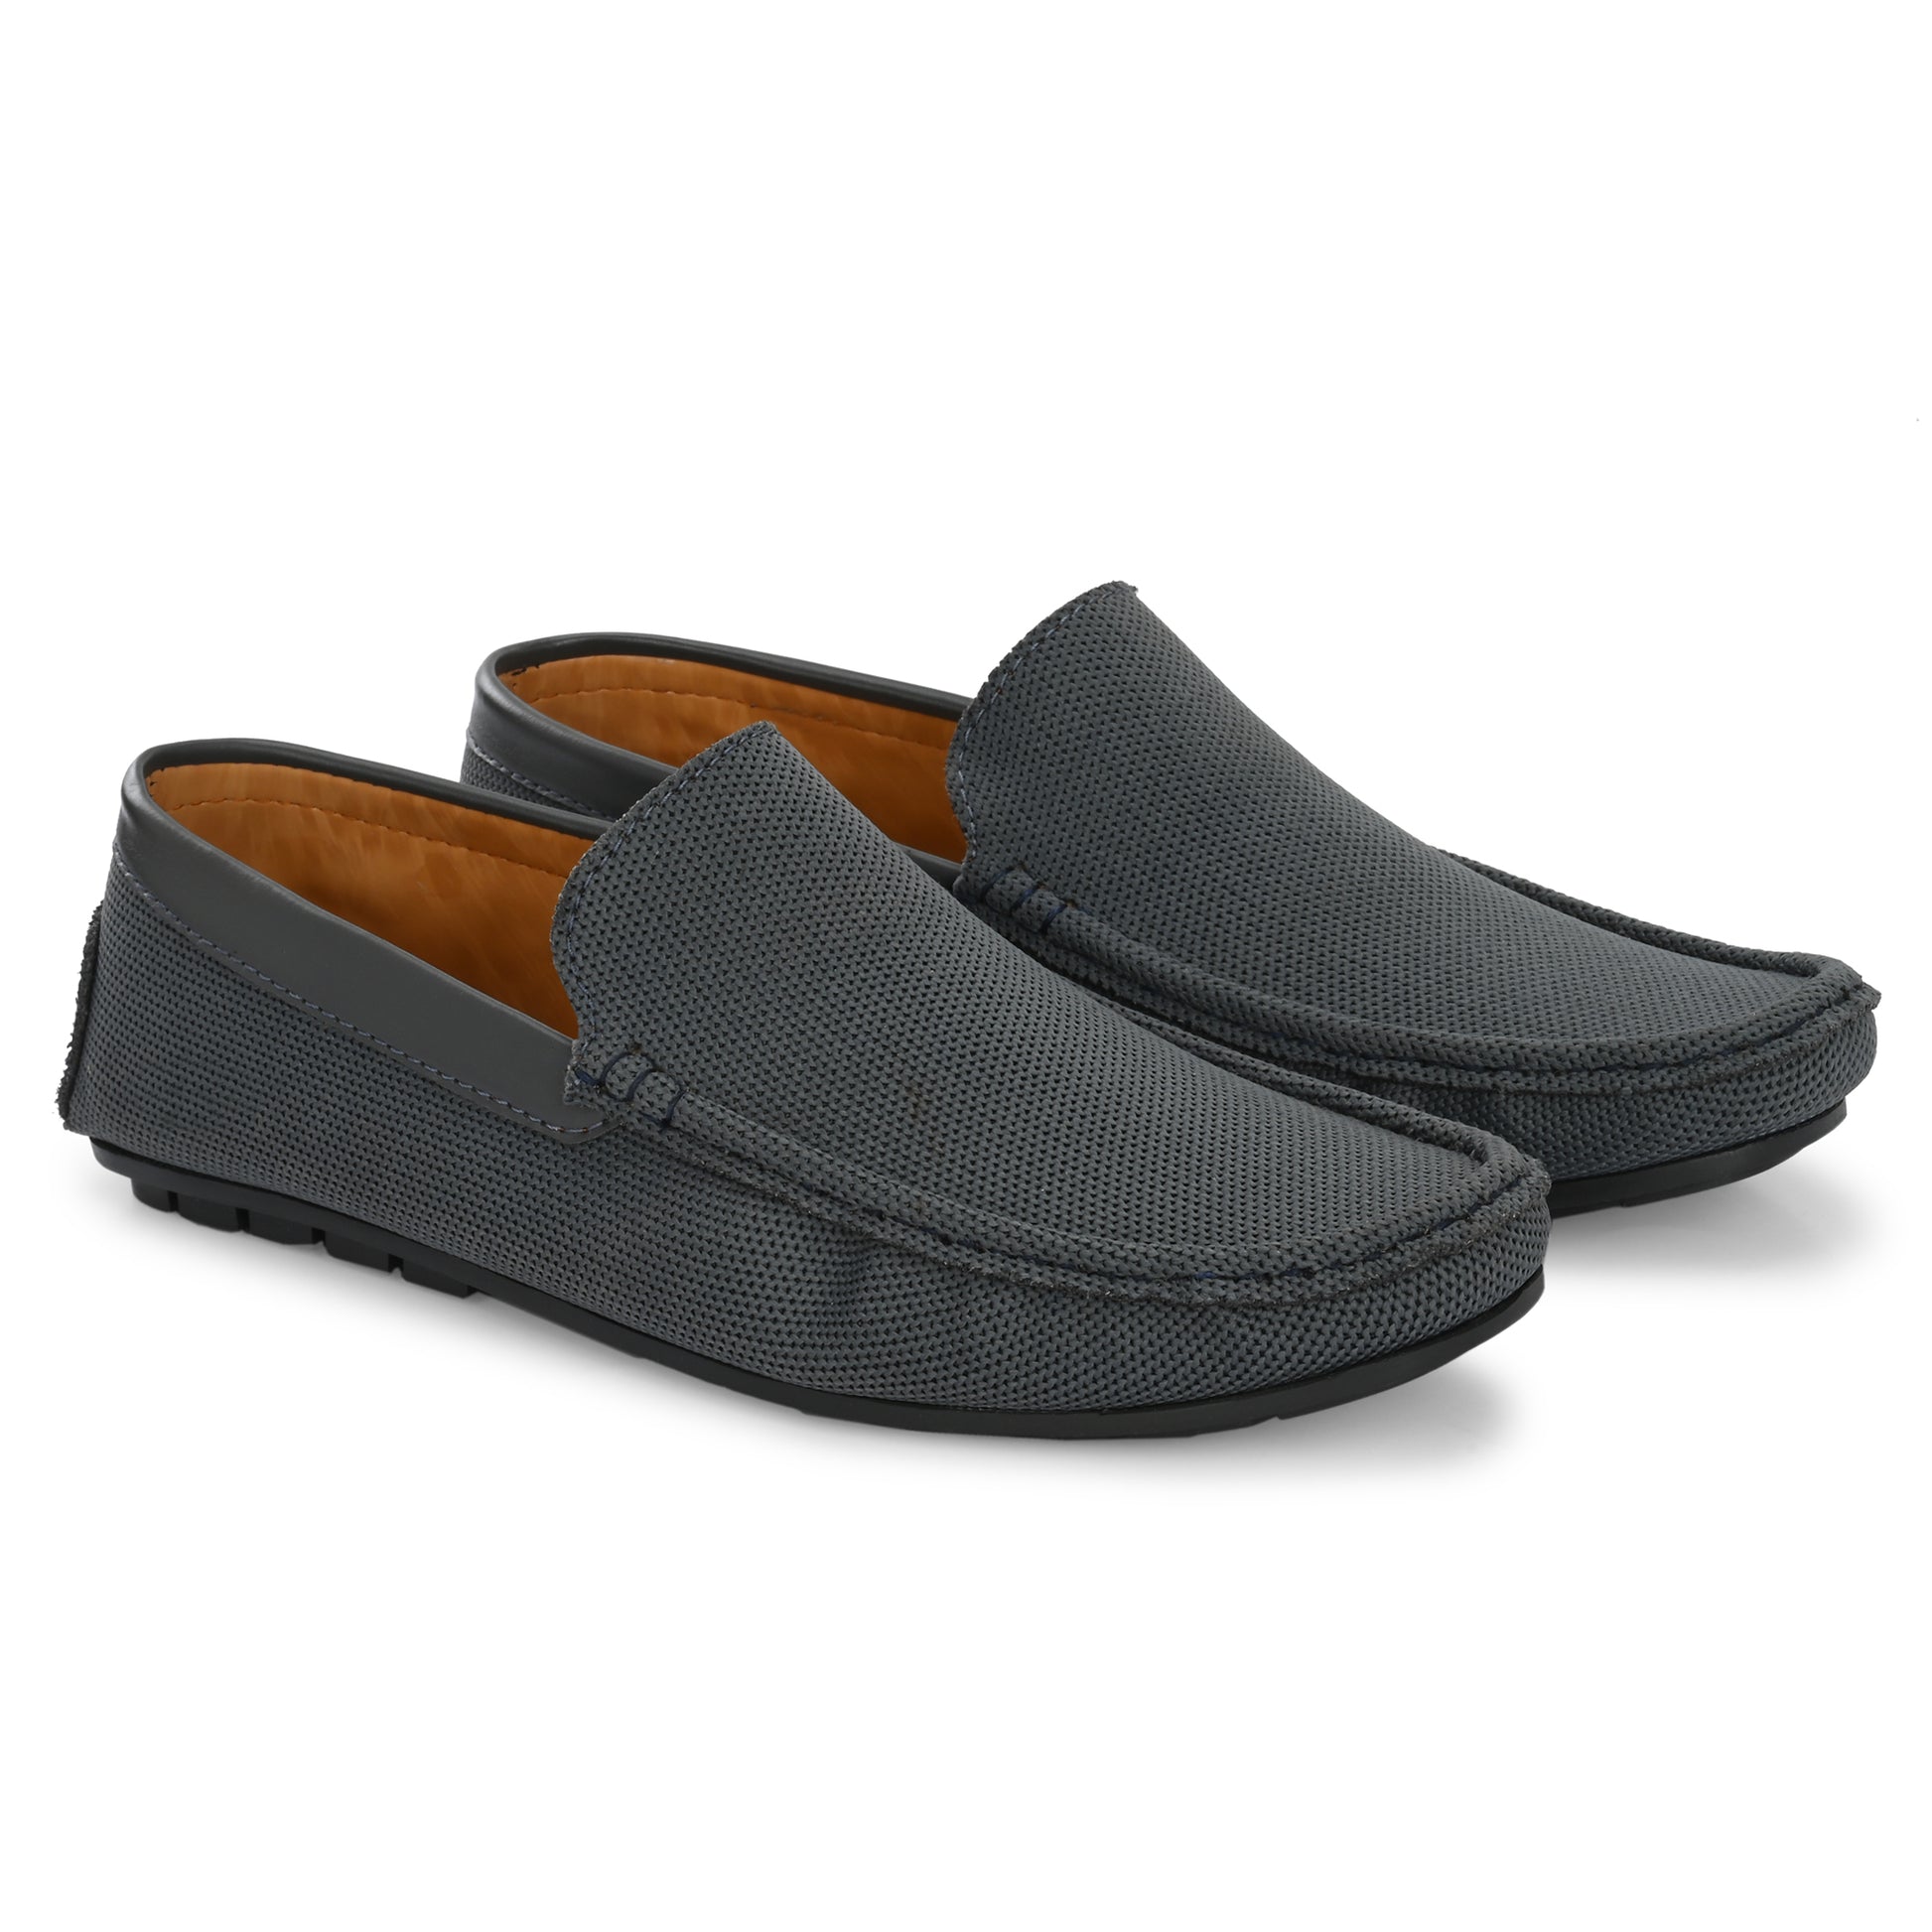 HNR Corporation Toro Blu Knit Loafers for Men | Lightweight Shoes for Boys, Designed for All Seasons HNR Corporation  Toro Blu  Toro Blu Knit Loafers for Men | Lightweight Shoes for Boys, Designed for All Seasons